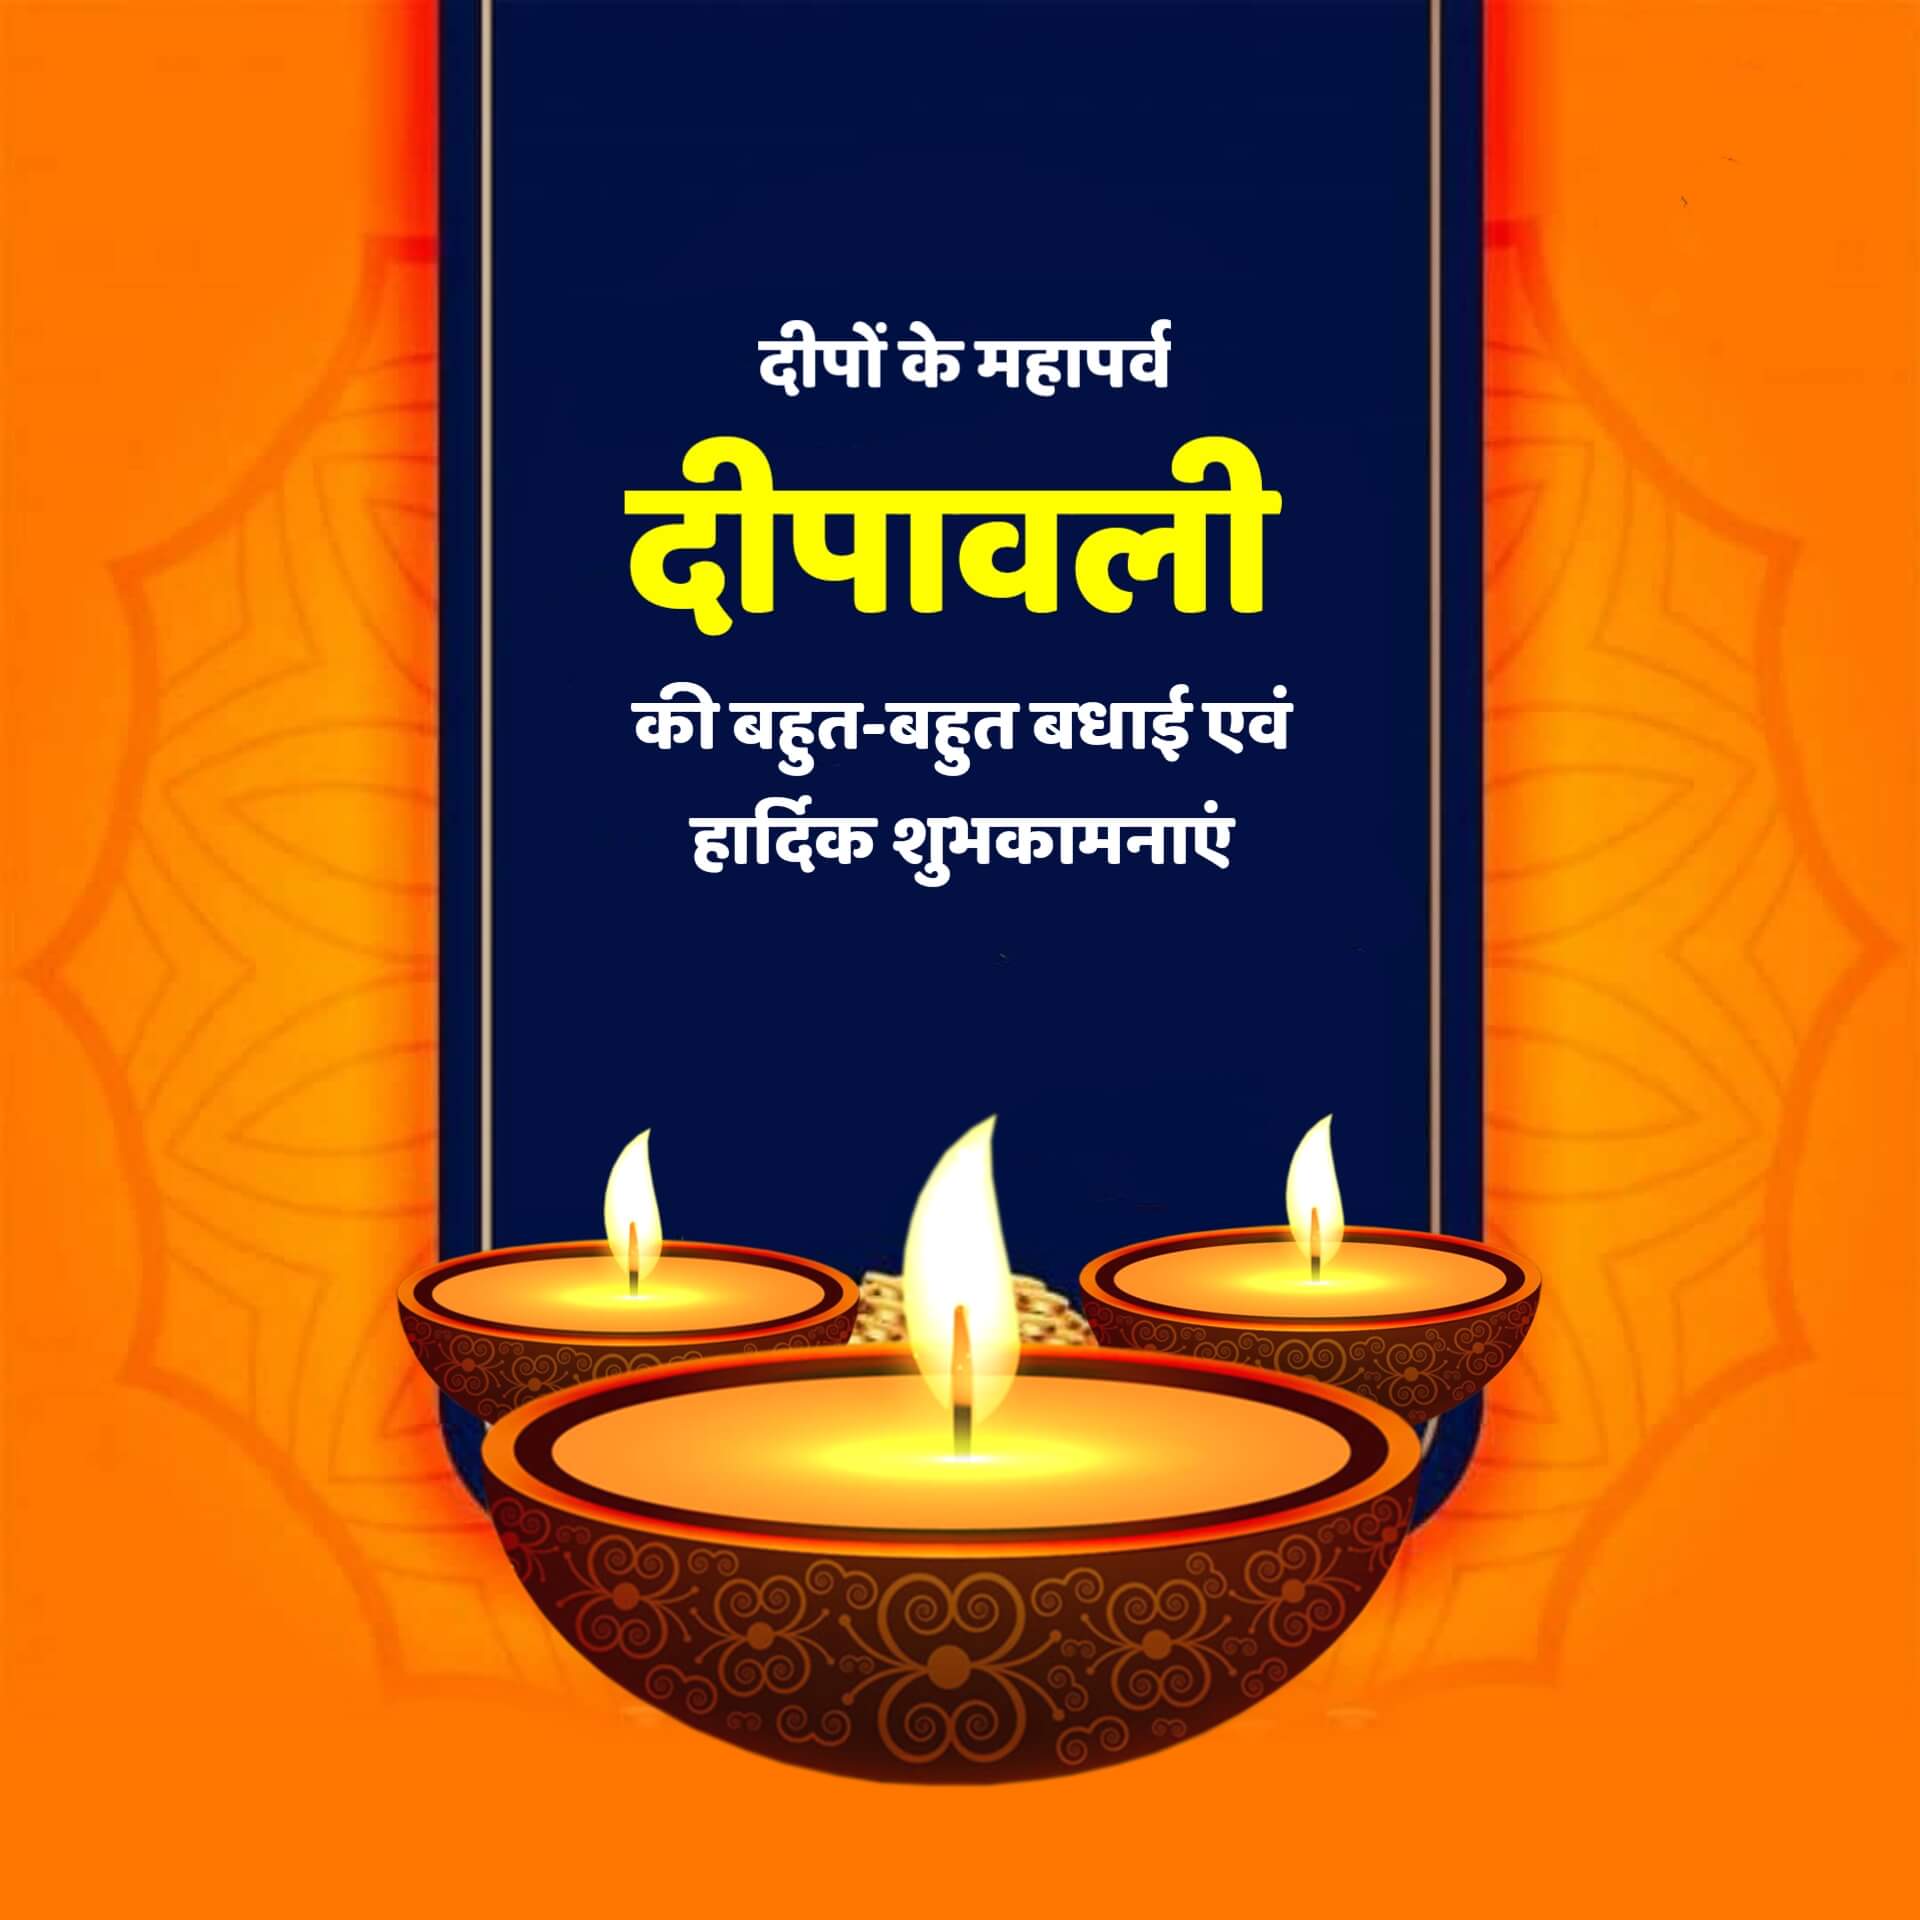 Hindi Diwali Wishes for Instagram